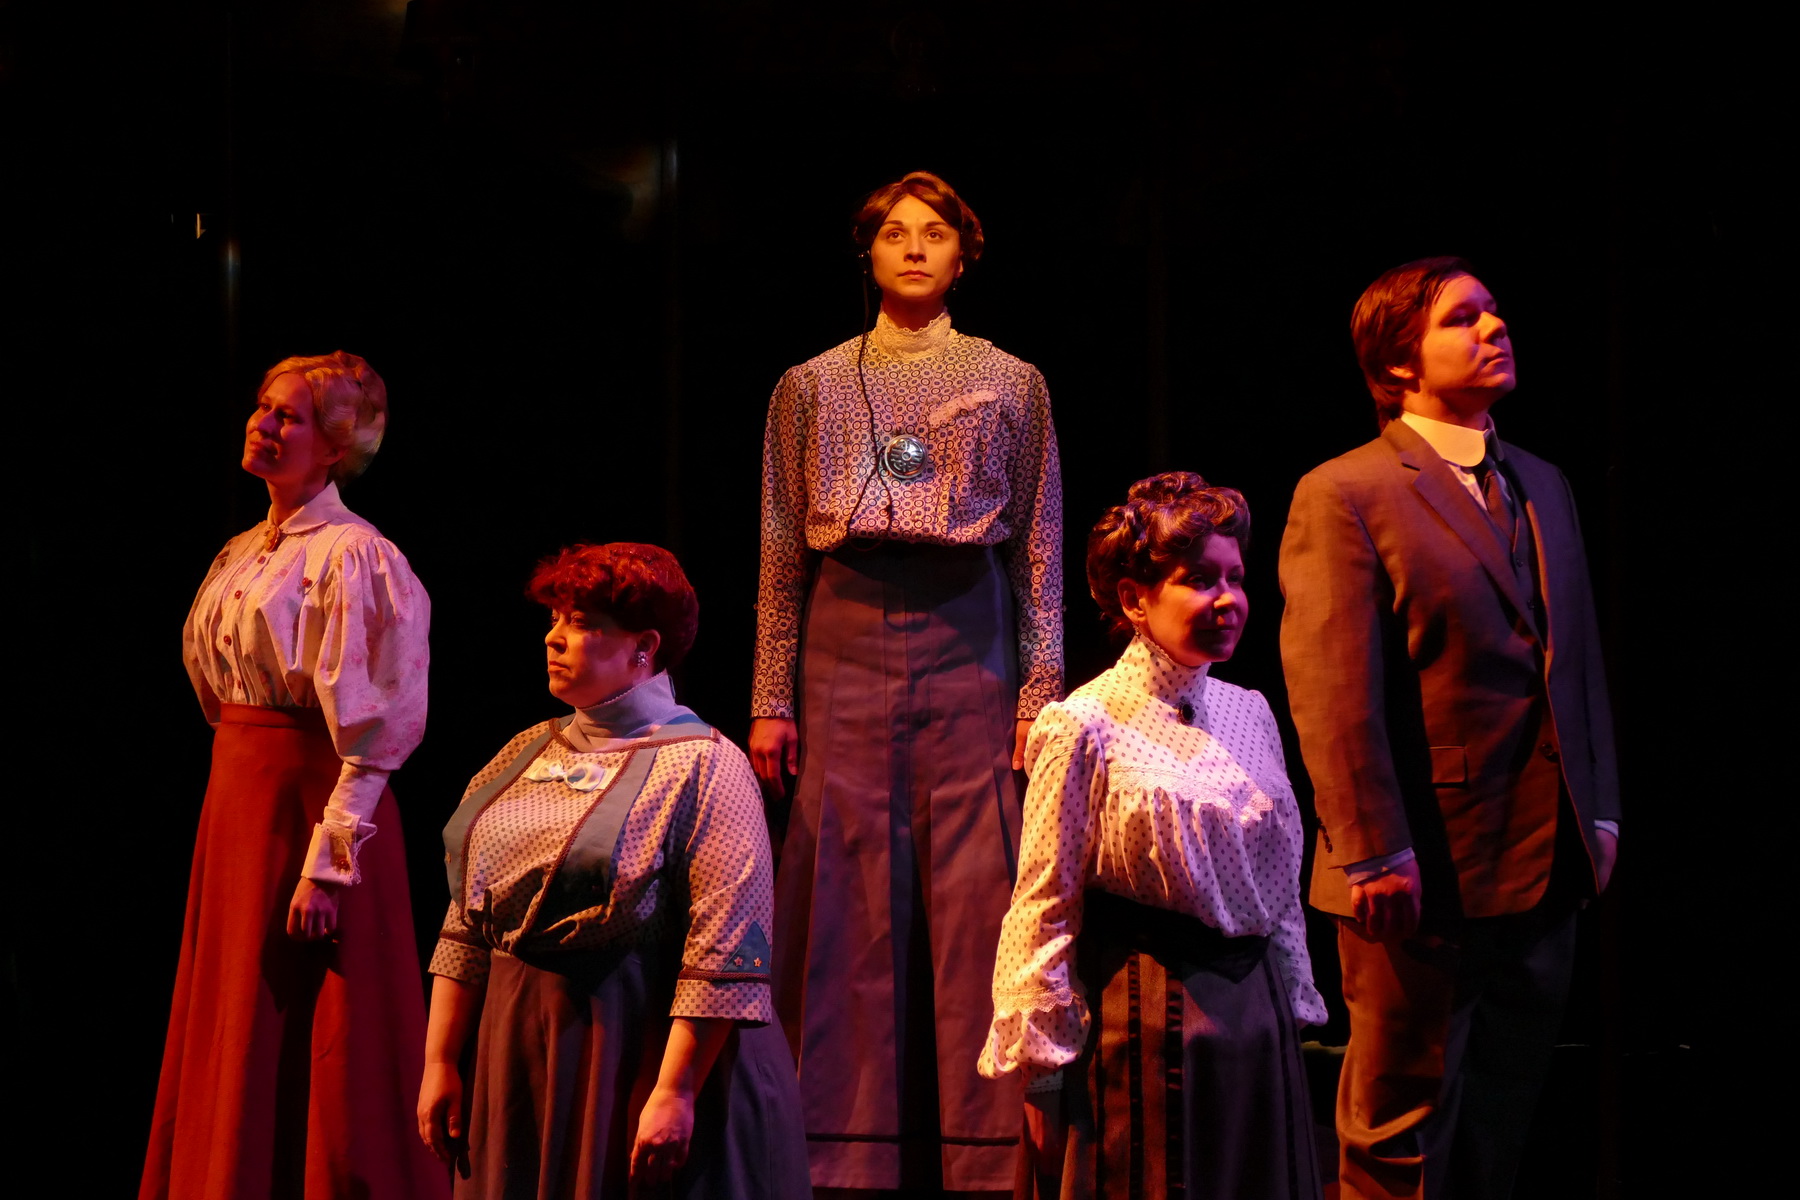 Jill Kenderes as Margaret Leavitt, Molly Clay as Williamina Fleming, Brittany Gaul as Henrietta Leavitt, Pam Matthews as Annie Cannon and Andrew Keller as Peter Shaw